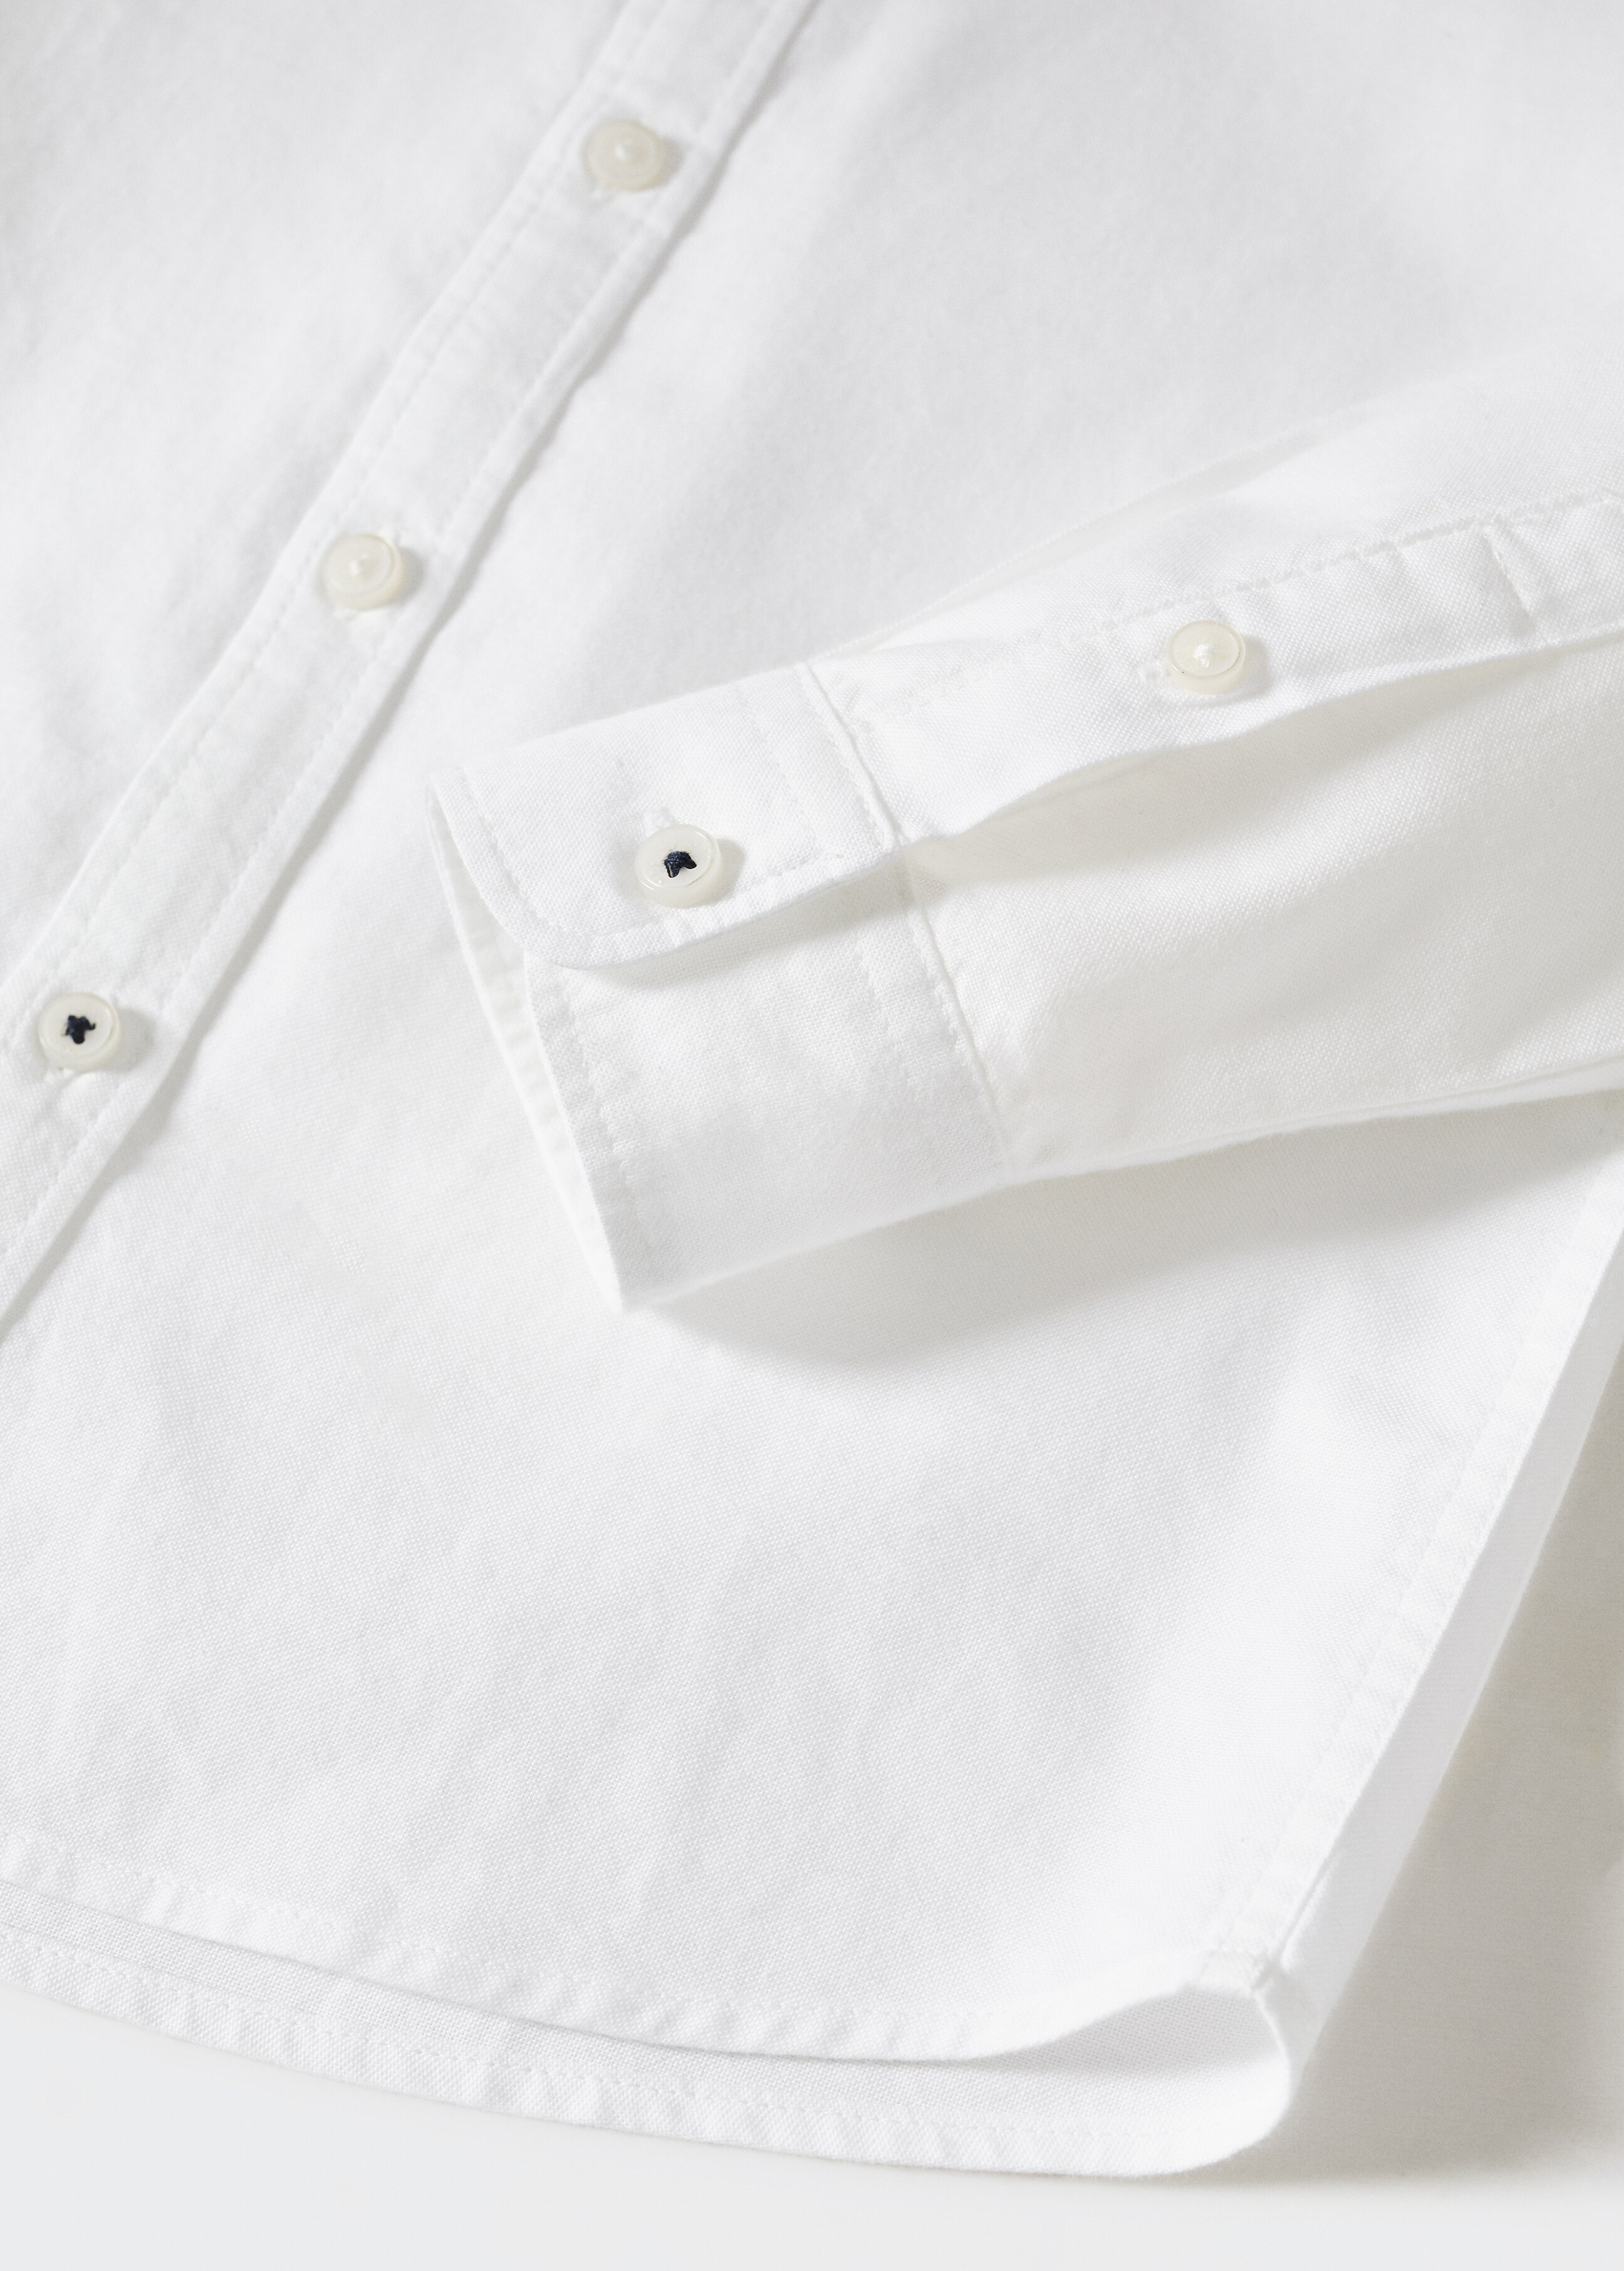 Oxford cotton shirt - Details of the article 8